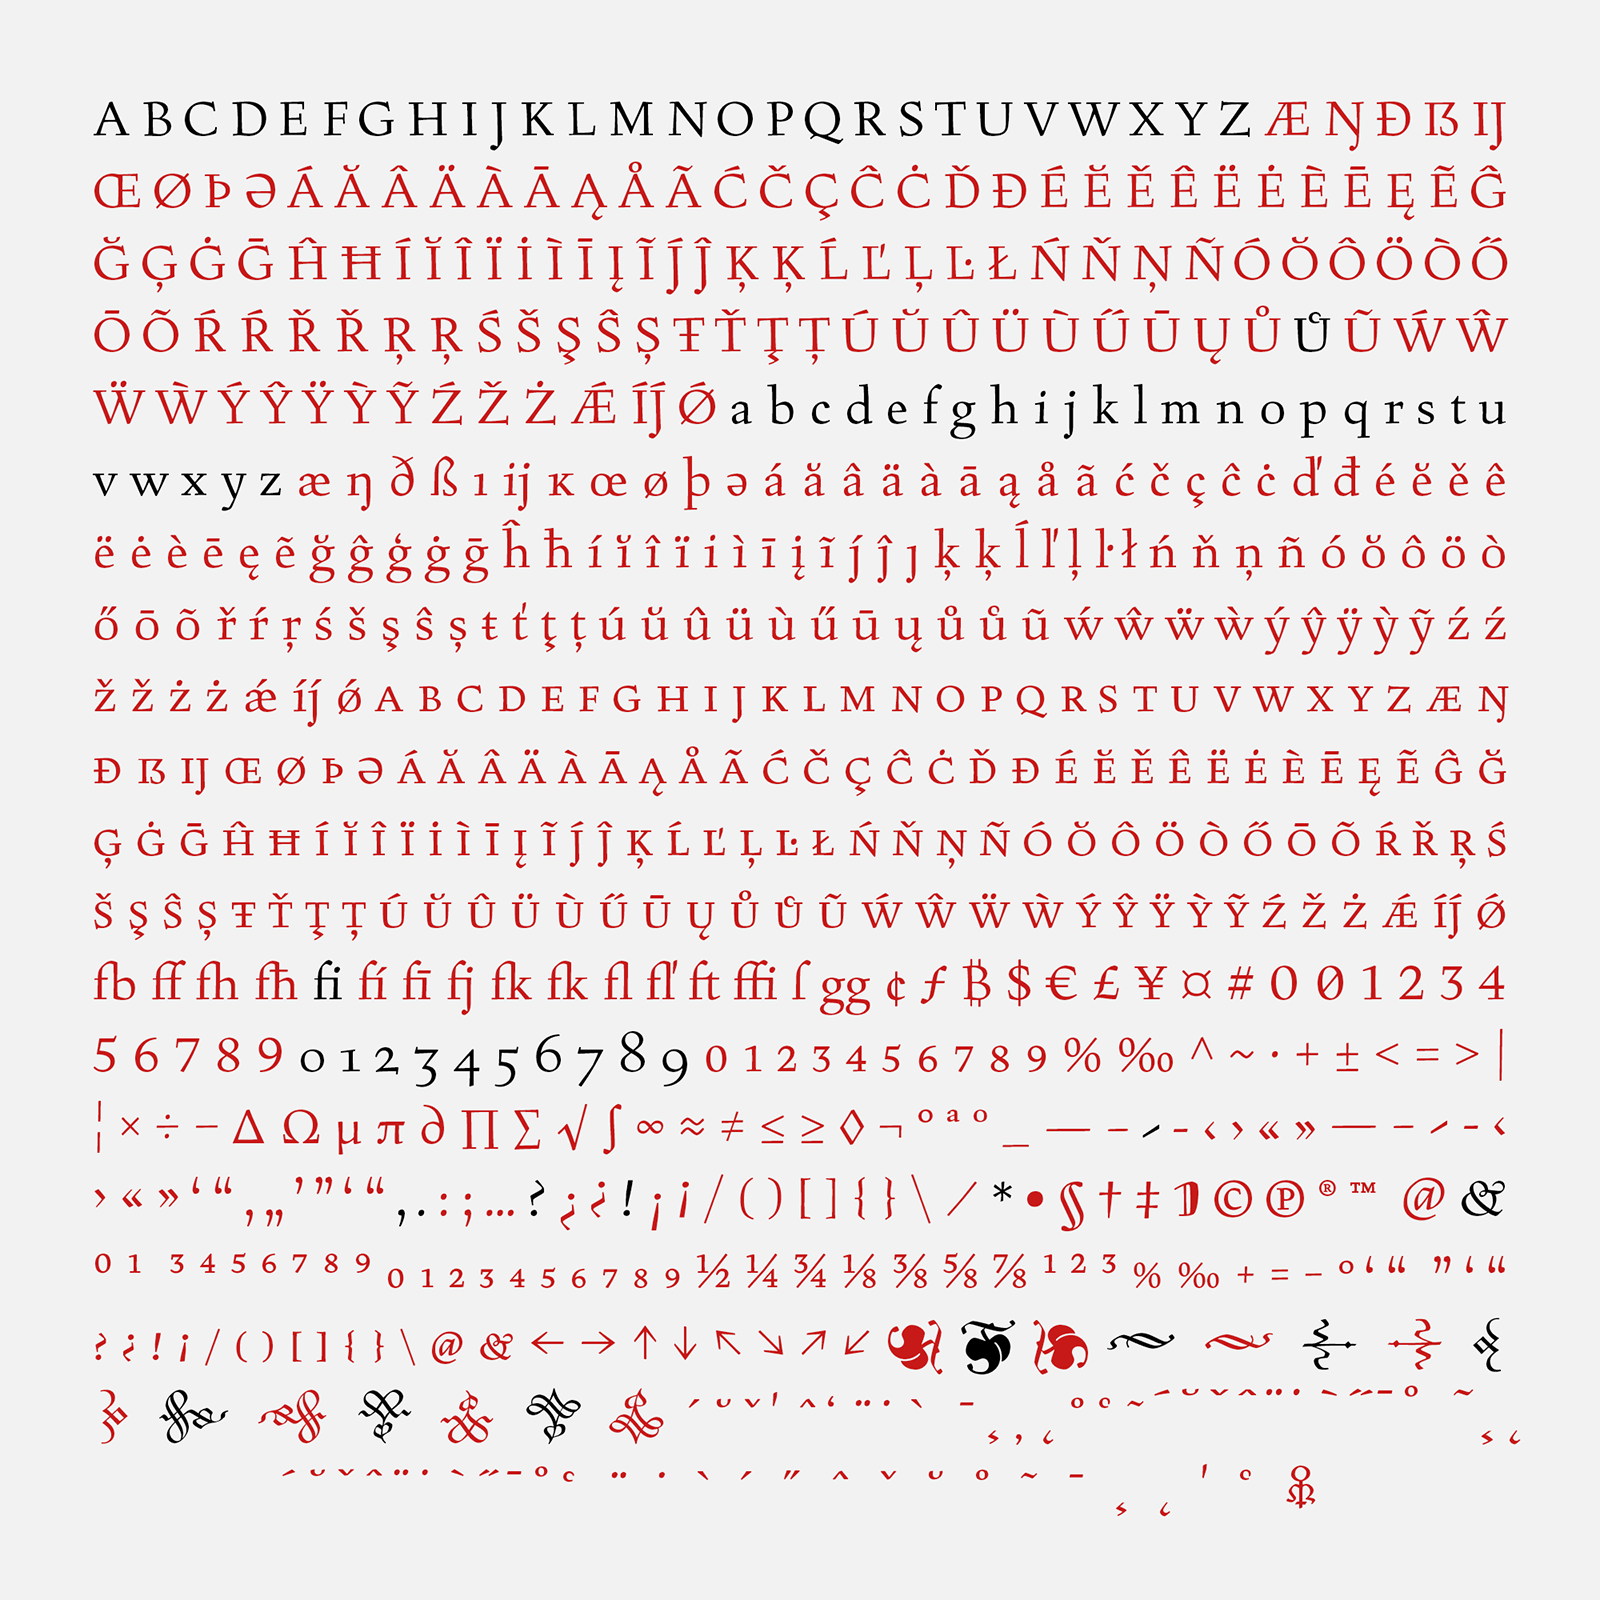 The BC Figural typeface’s complete character set. The ones marked in black are the original characters designed by Oldřich Menhart. The red characters are the ones that have been newly created.